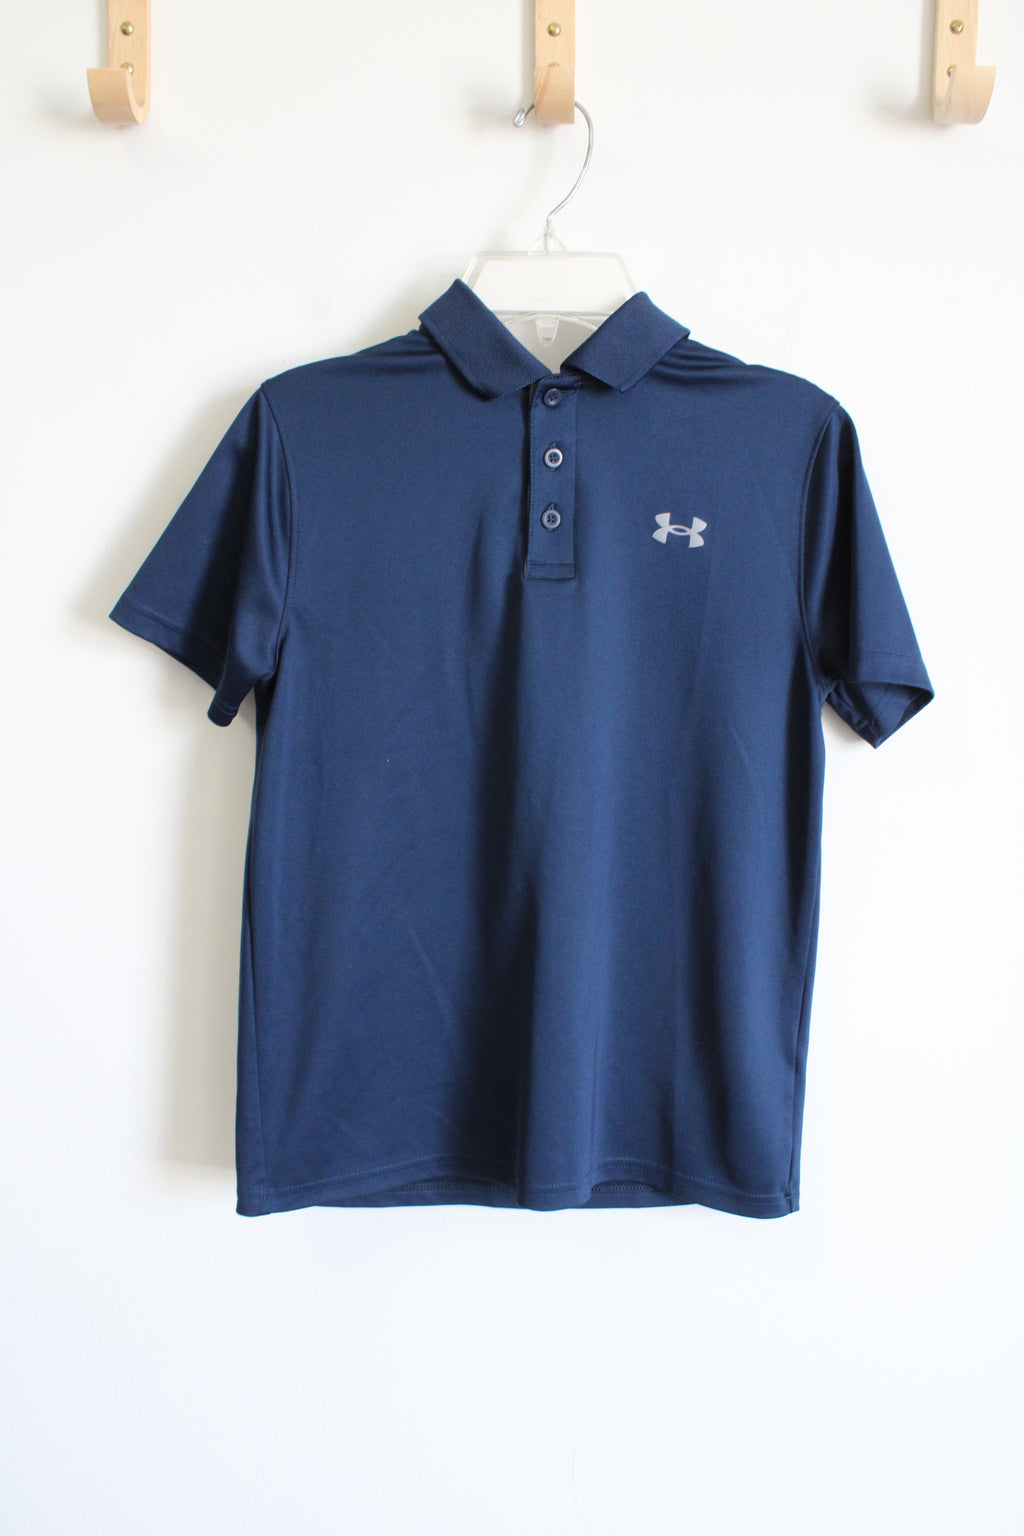 Under Armour Loose Fit Navy Blue Polo Shirt | Youth M (10/12)